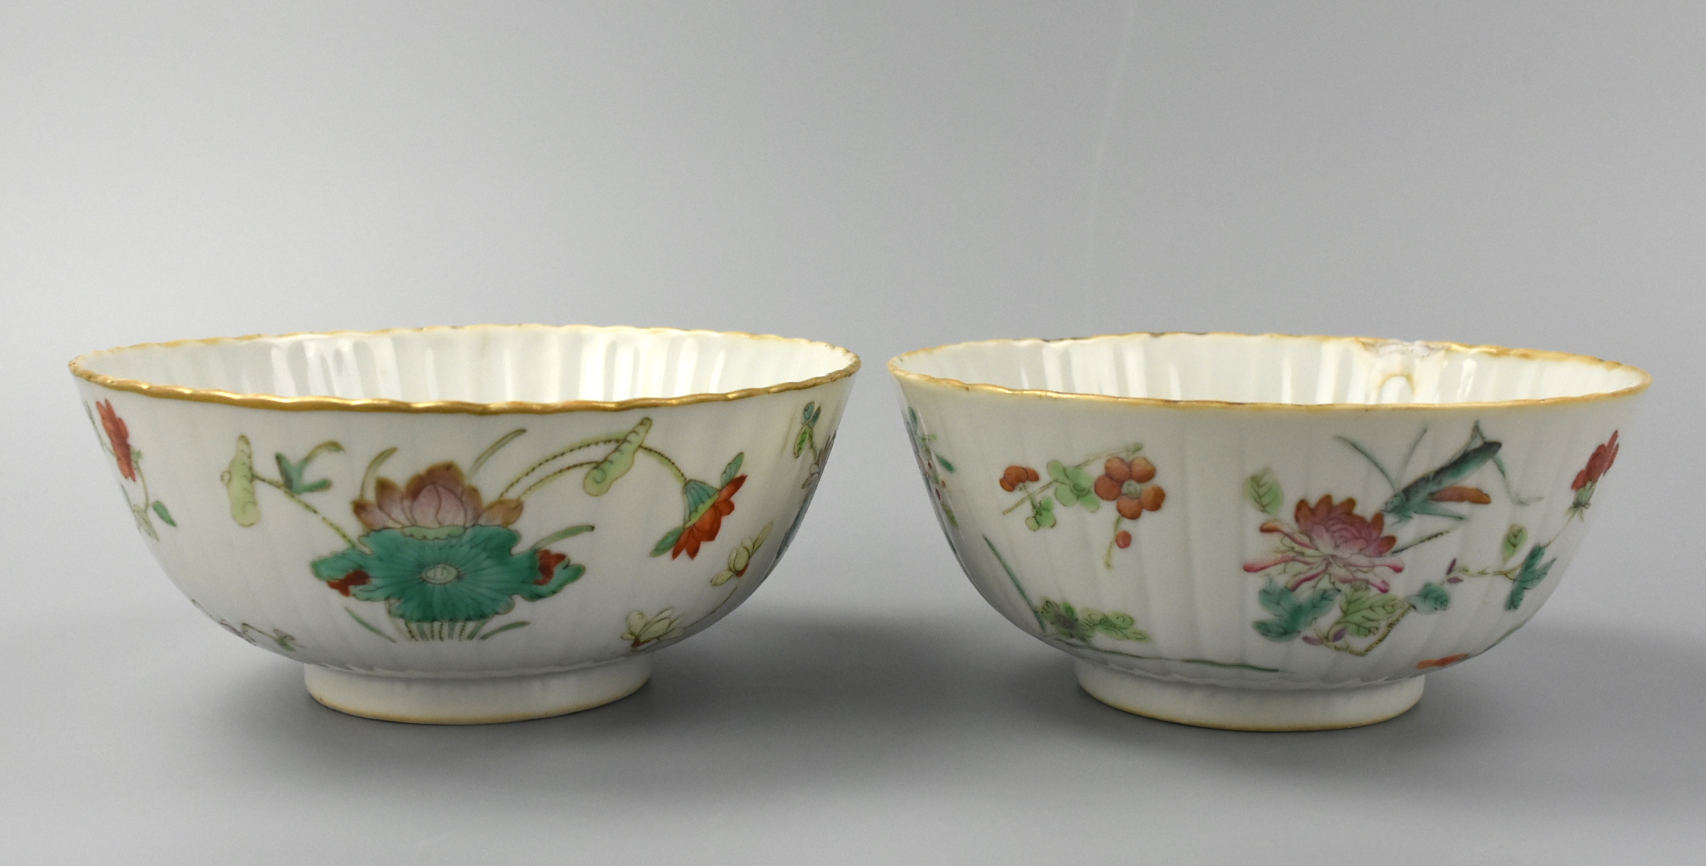 PAIR OF CHINESE FAMILLE ROSE BOWLS ,19TH